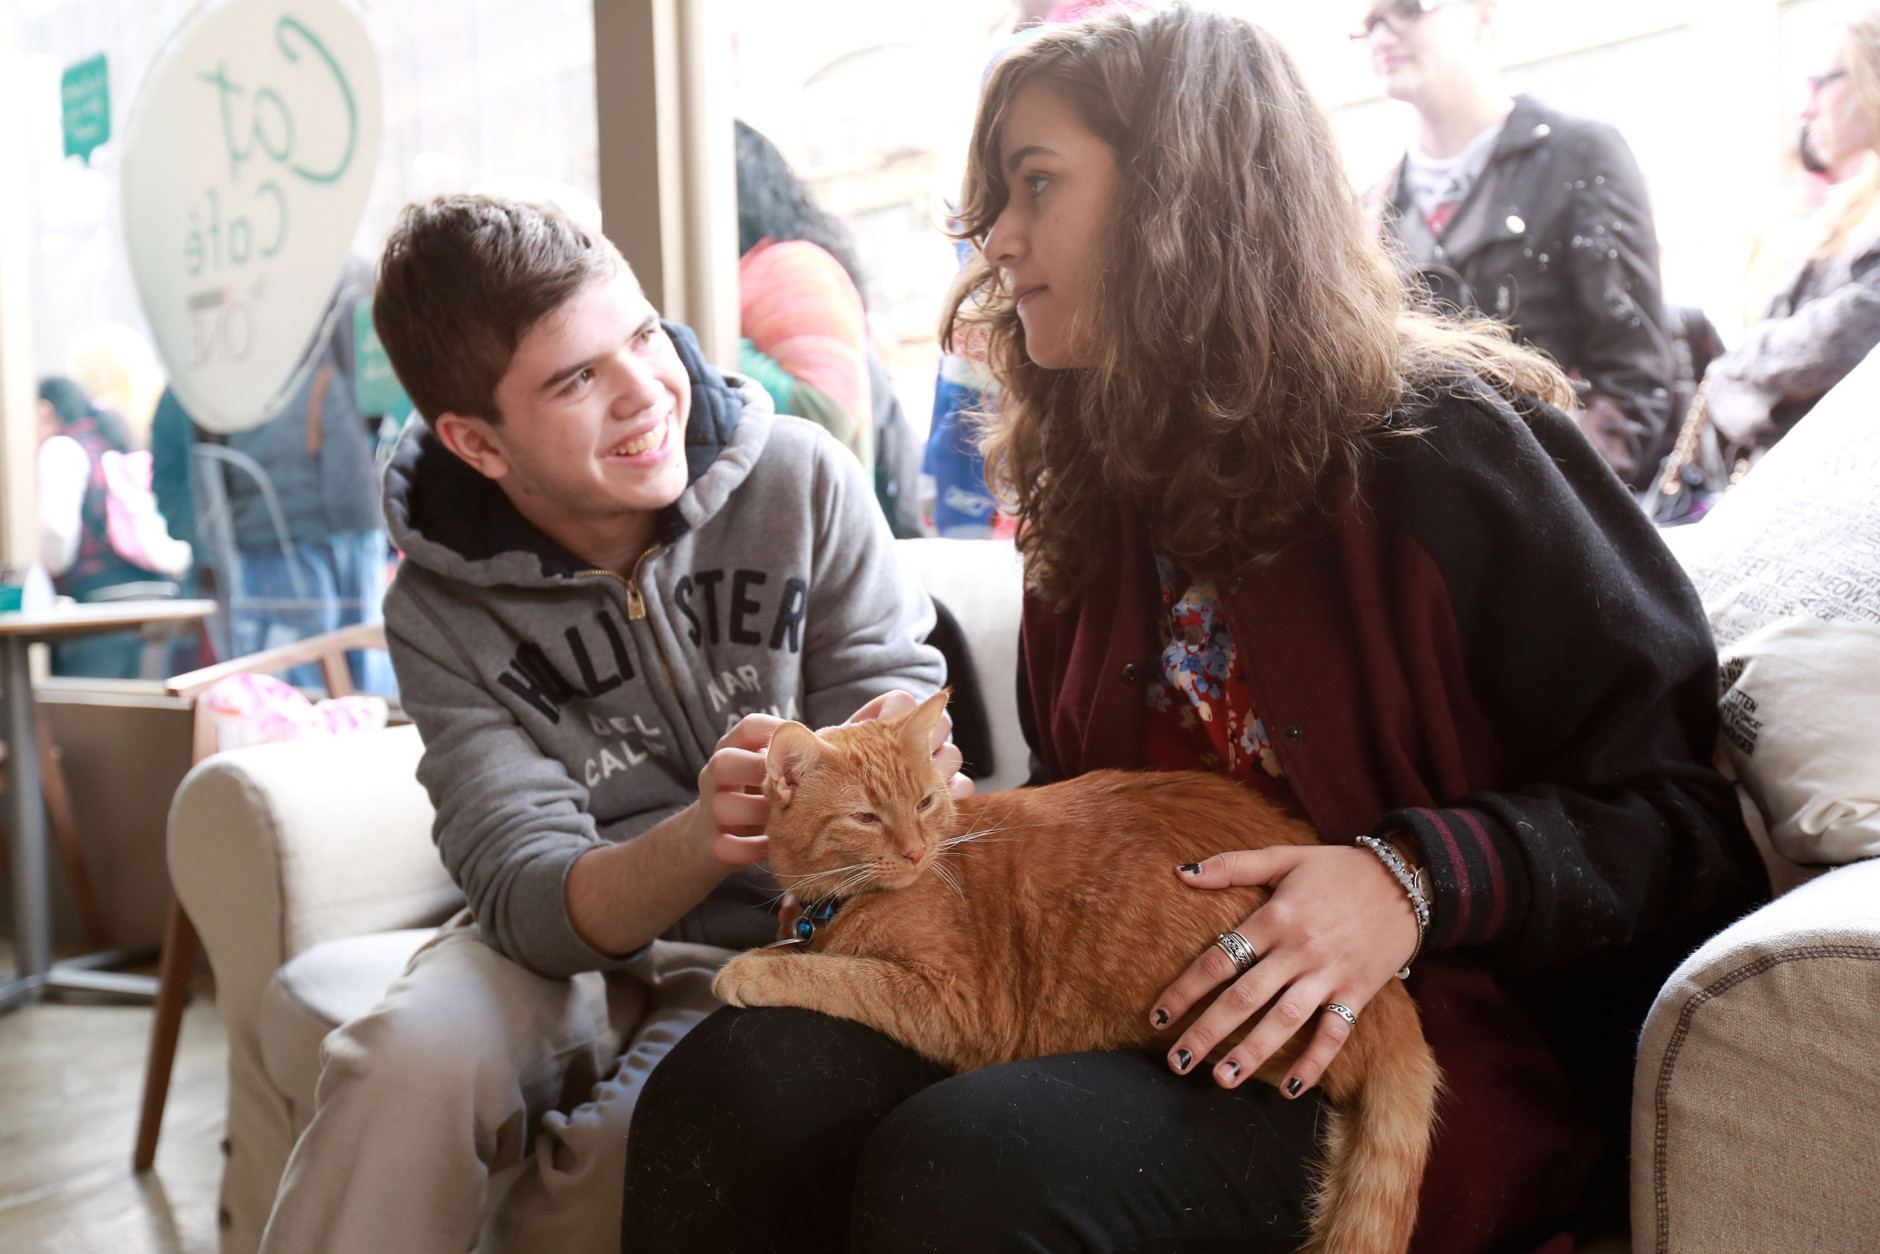 People hang out with cats from North Shore Animal League during the adoption drive held at the Cat Café by Purina ONE on Sunday, April 27, 2014 in New York. (Photo by Amy Sussman/Invision for Purina ONE/AP Images)